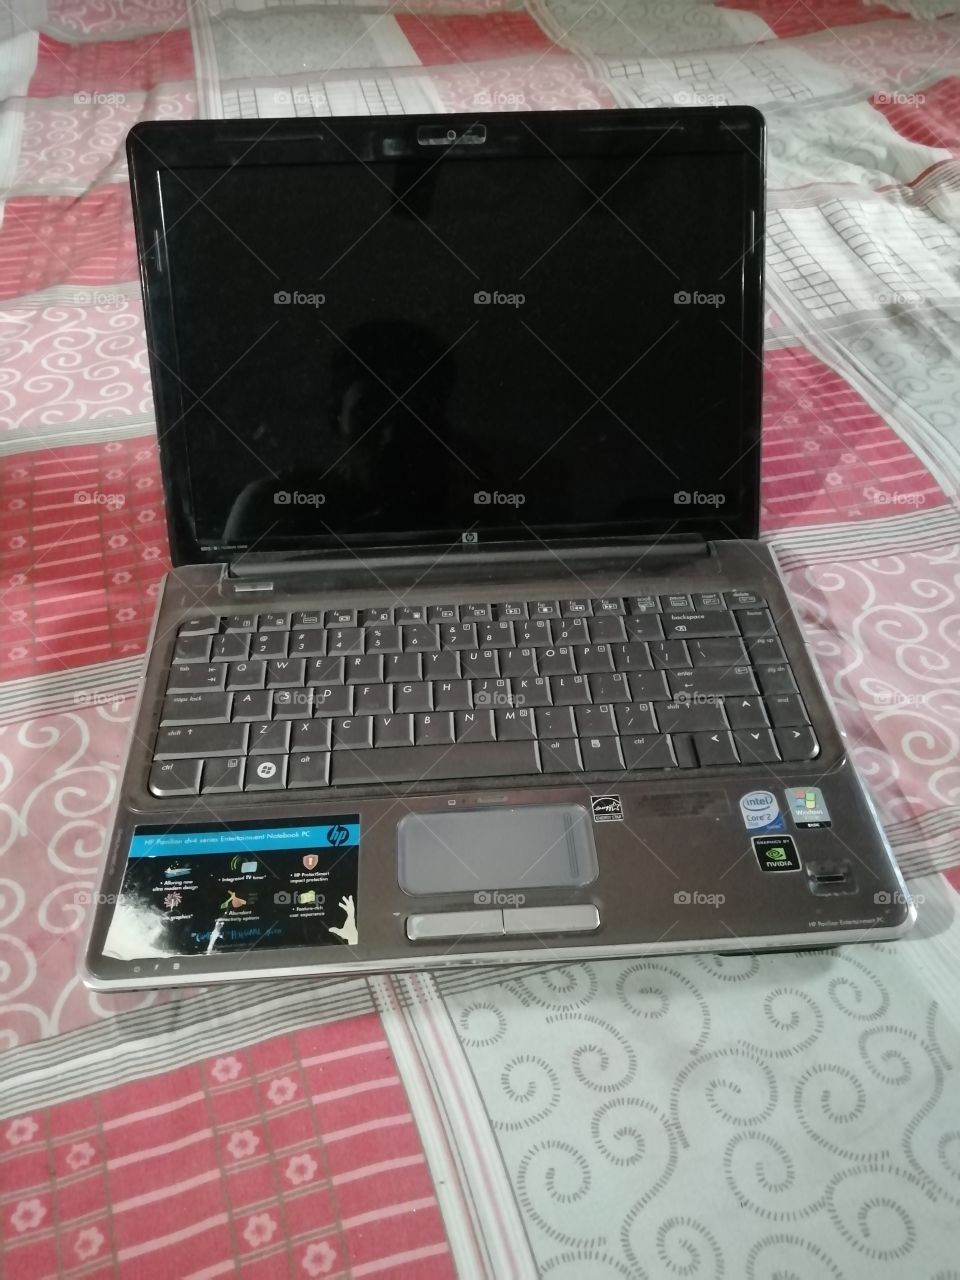 Hp laptop, beautiful laptop pic, screen touch laptop of Hp,